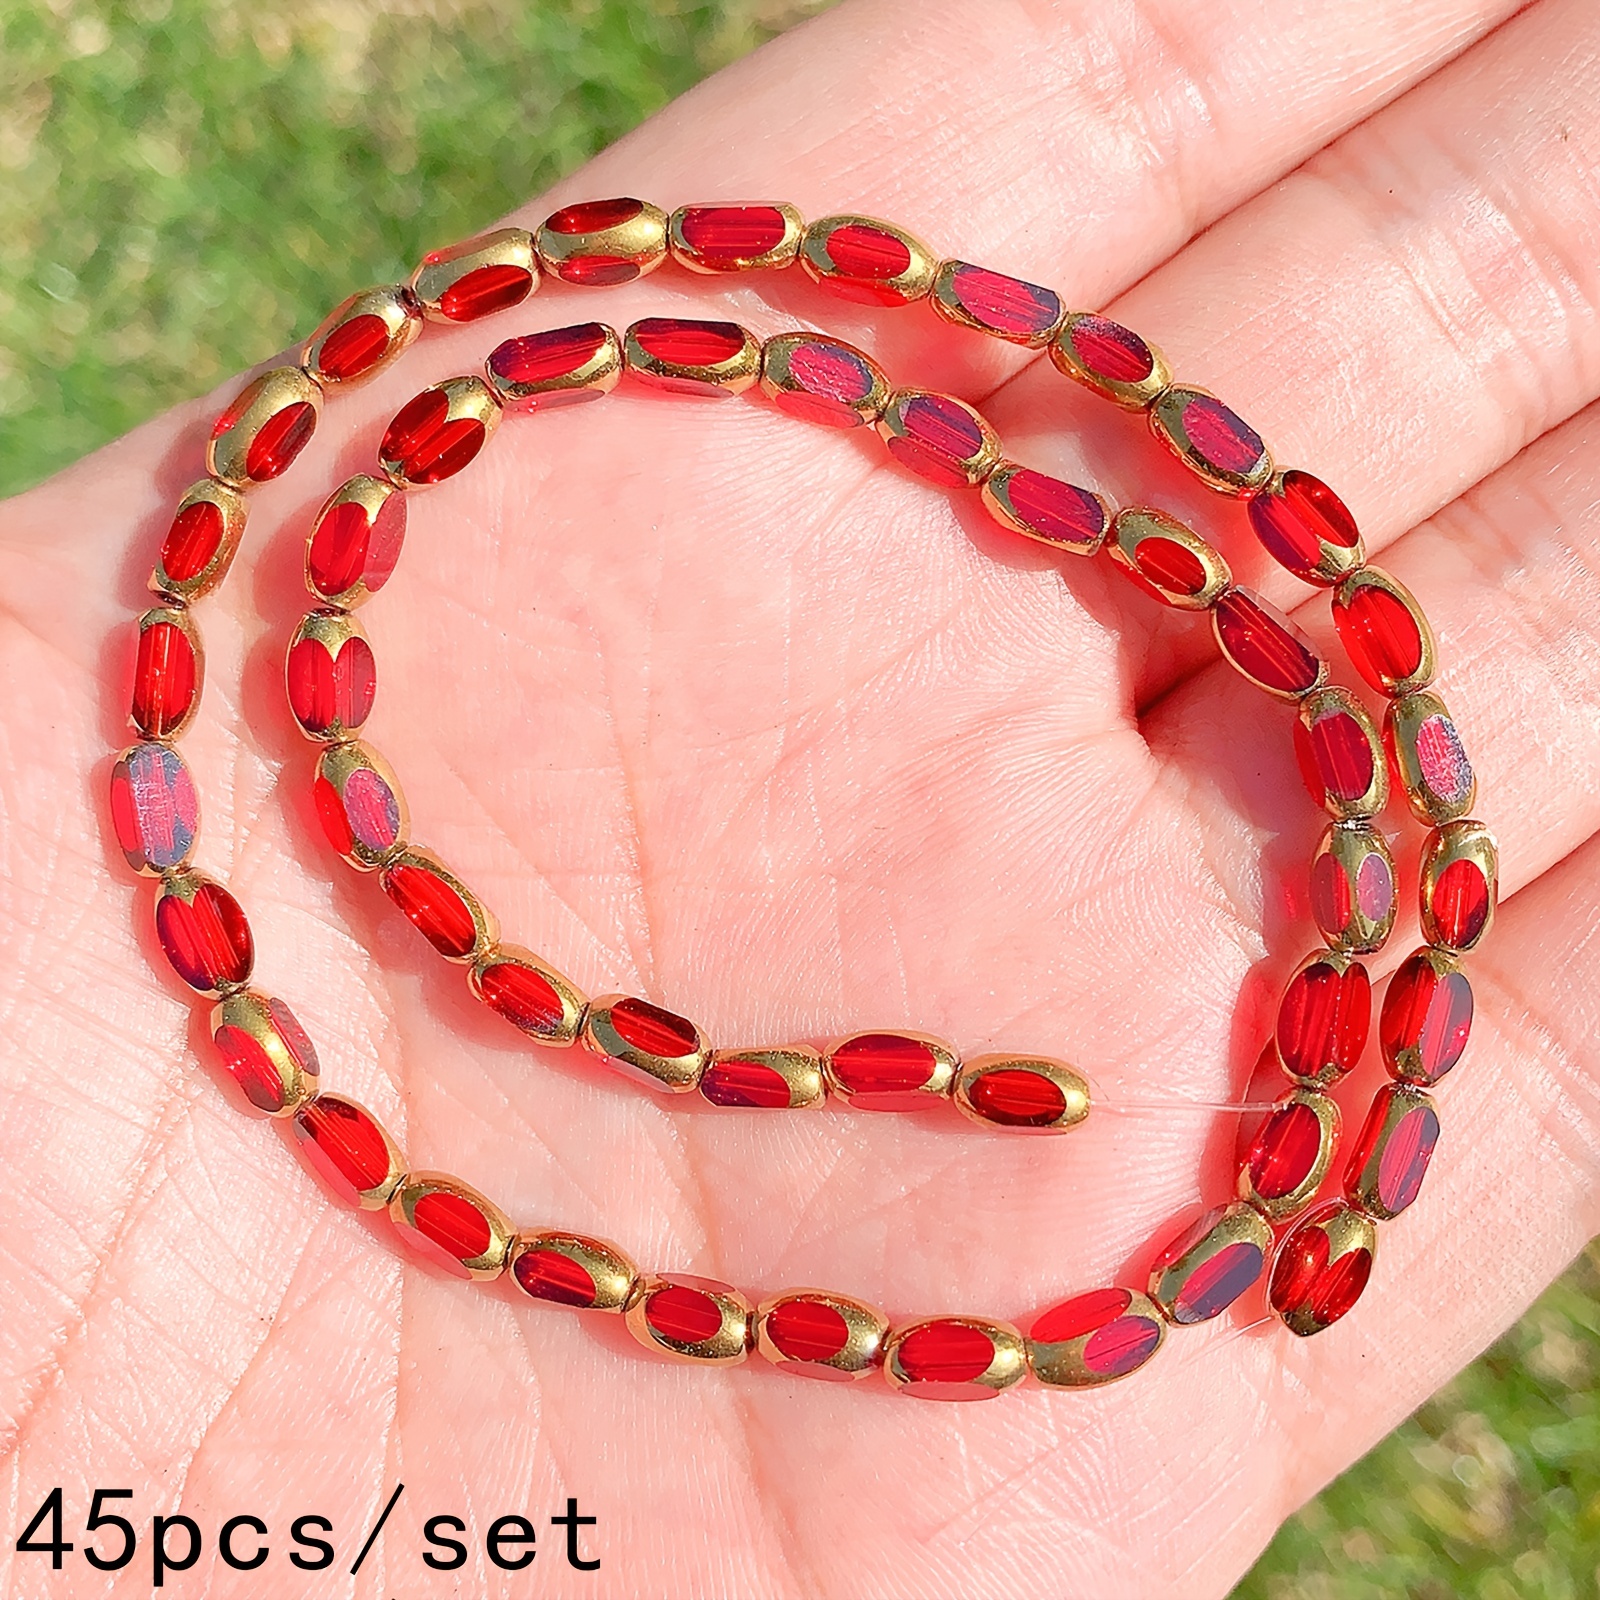 45pcs/set Transparent Red Crystal Beads Gemstones, Glass Beads Multifacted  Spacer Beads For DIY Bracelet Beads Jewelry Accessories